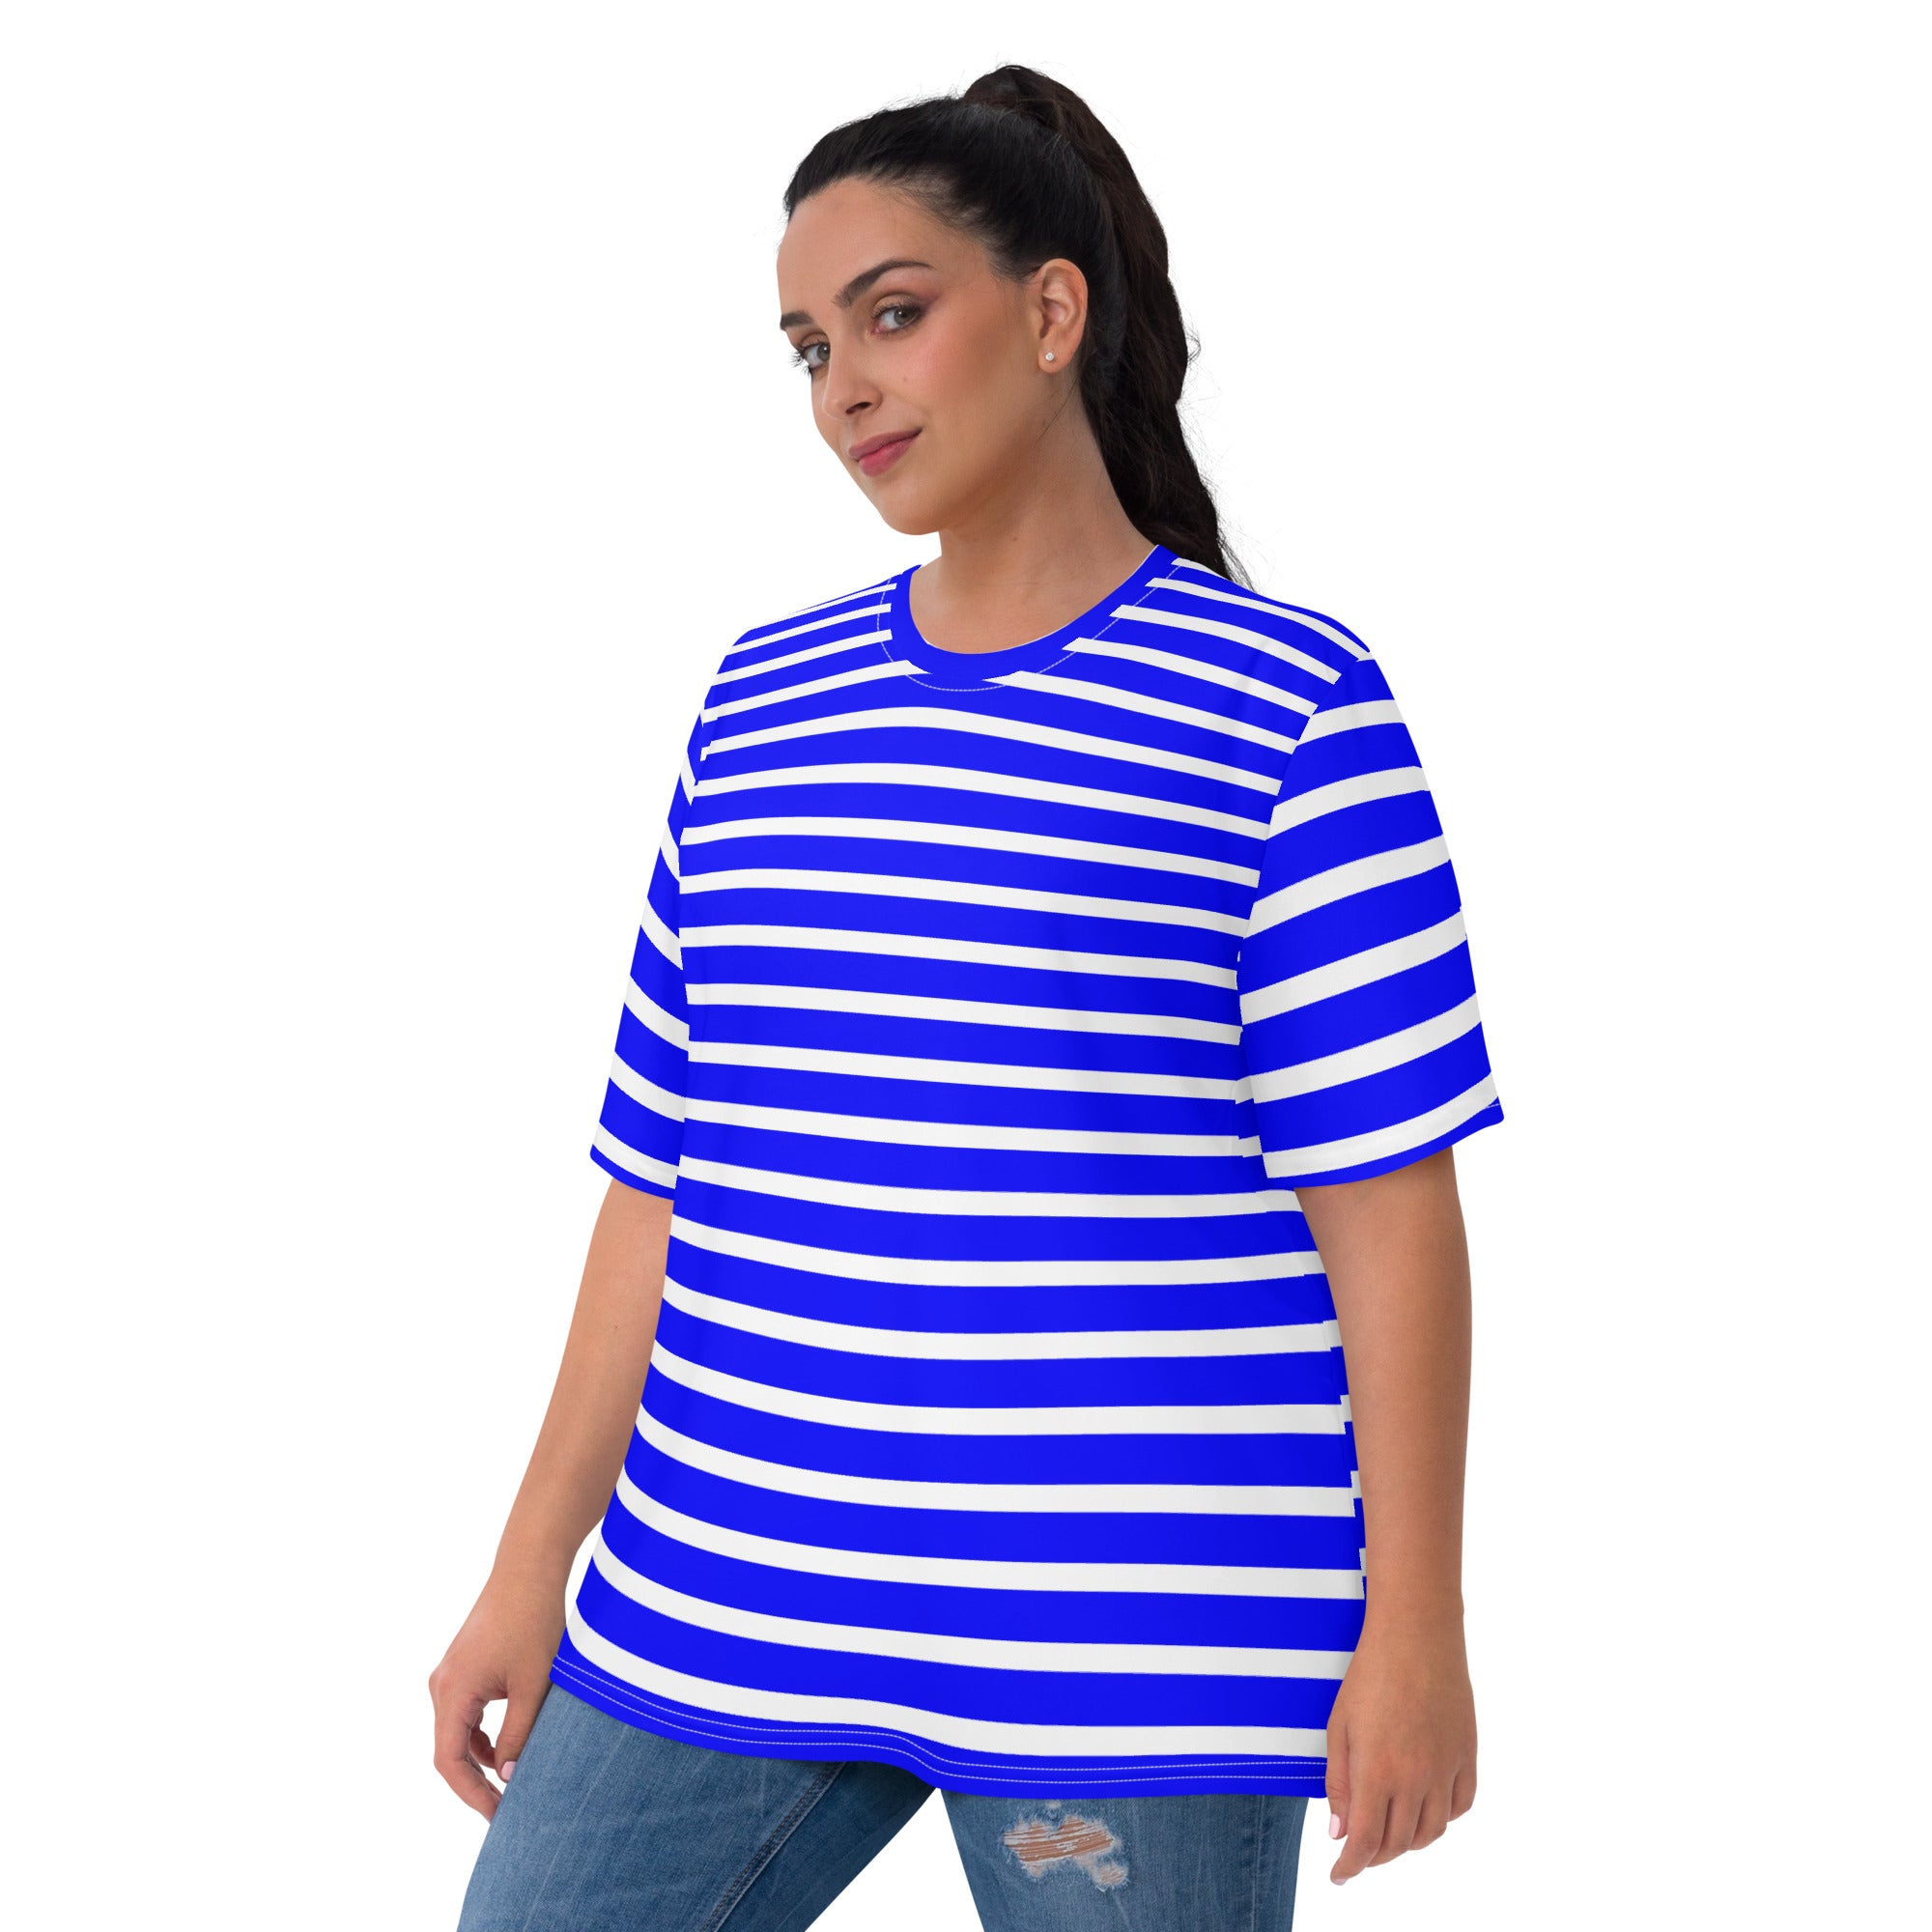 Women's T-shirt- White and Blue Striped